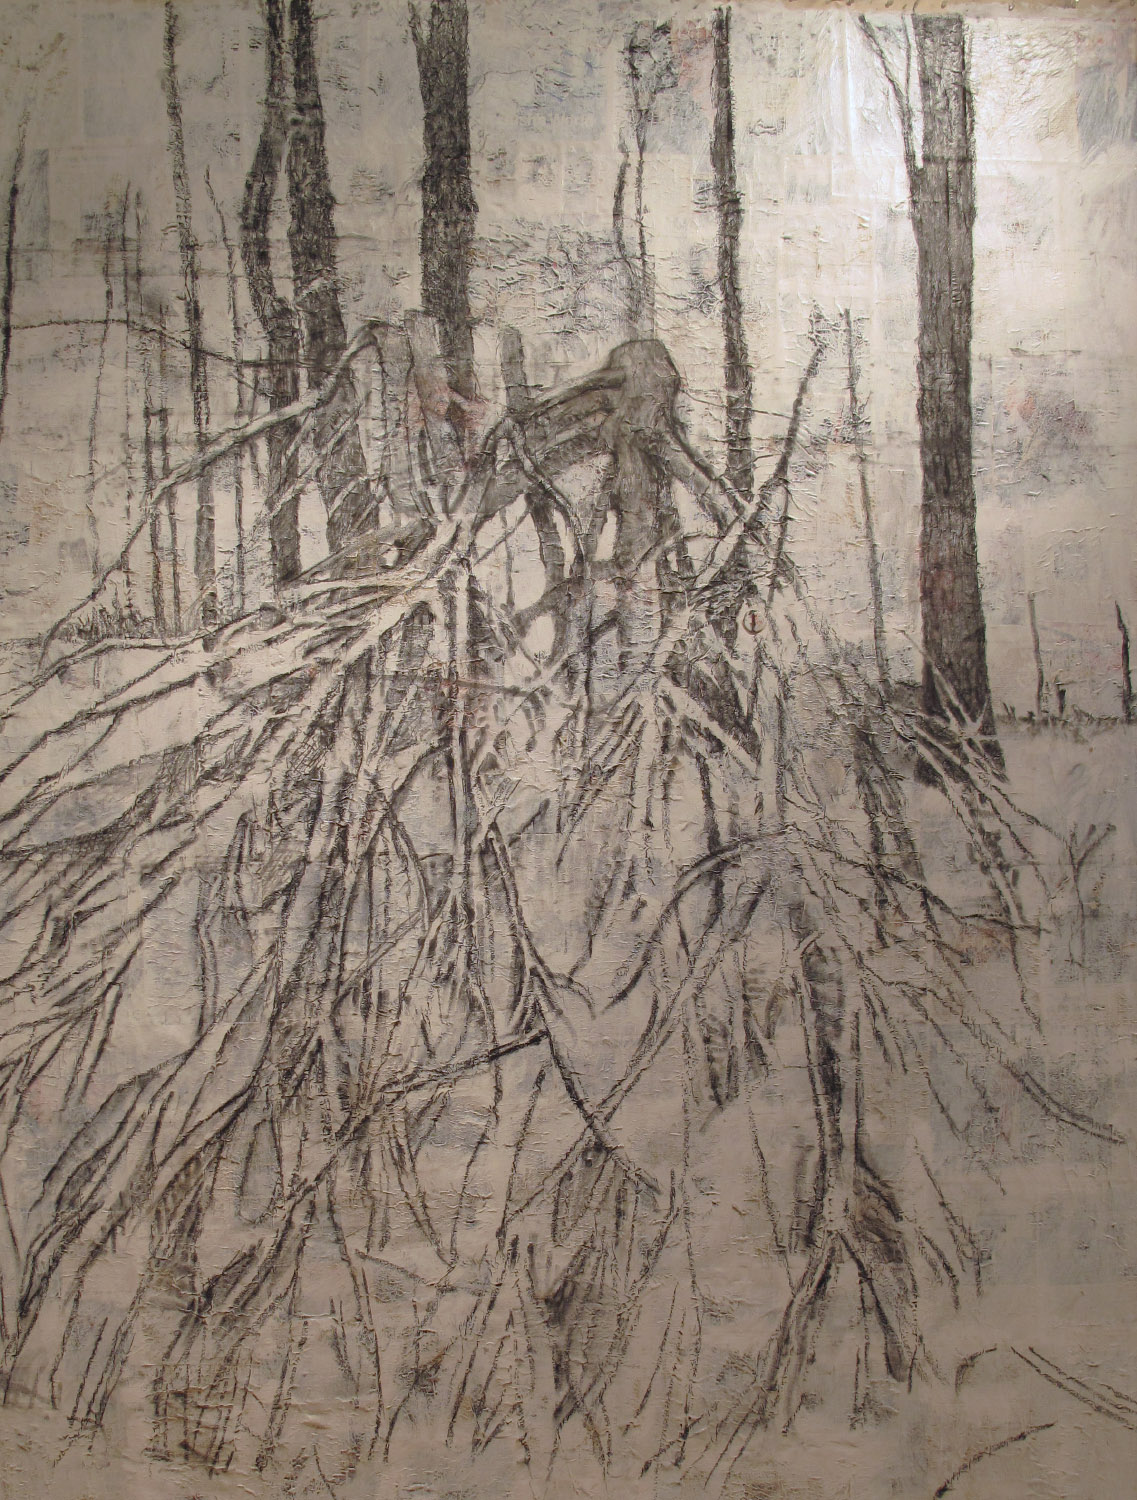 2ah(0), charcoal, gesso, print media collage on canvas, 96x78 in. 2001.jpg